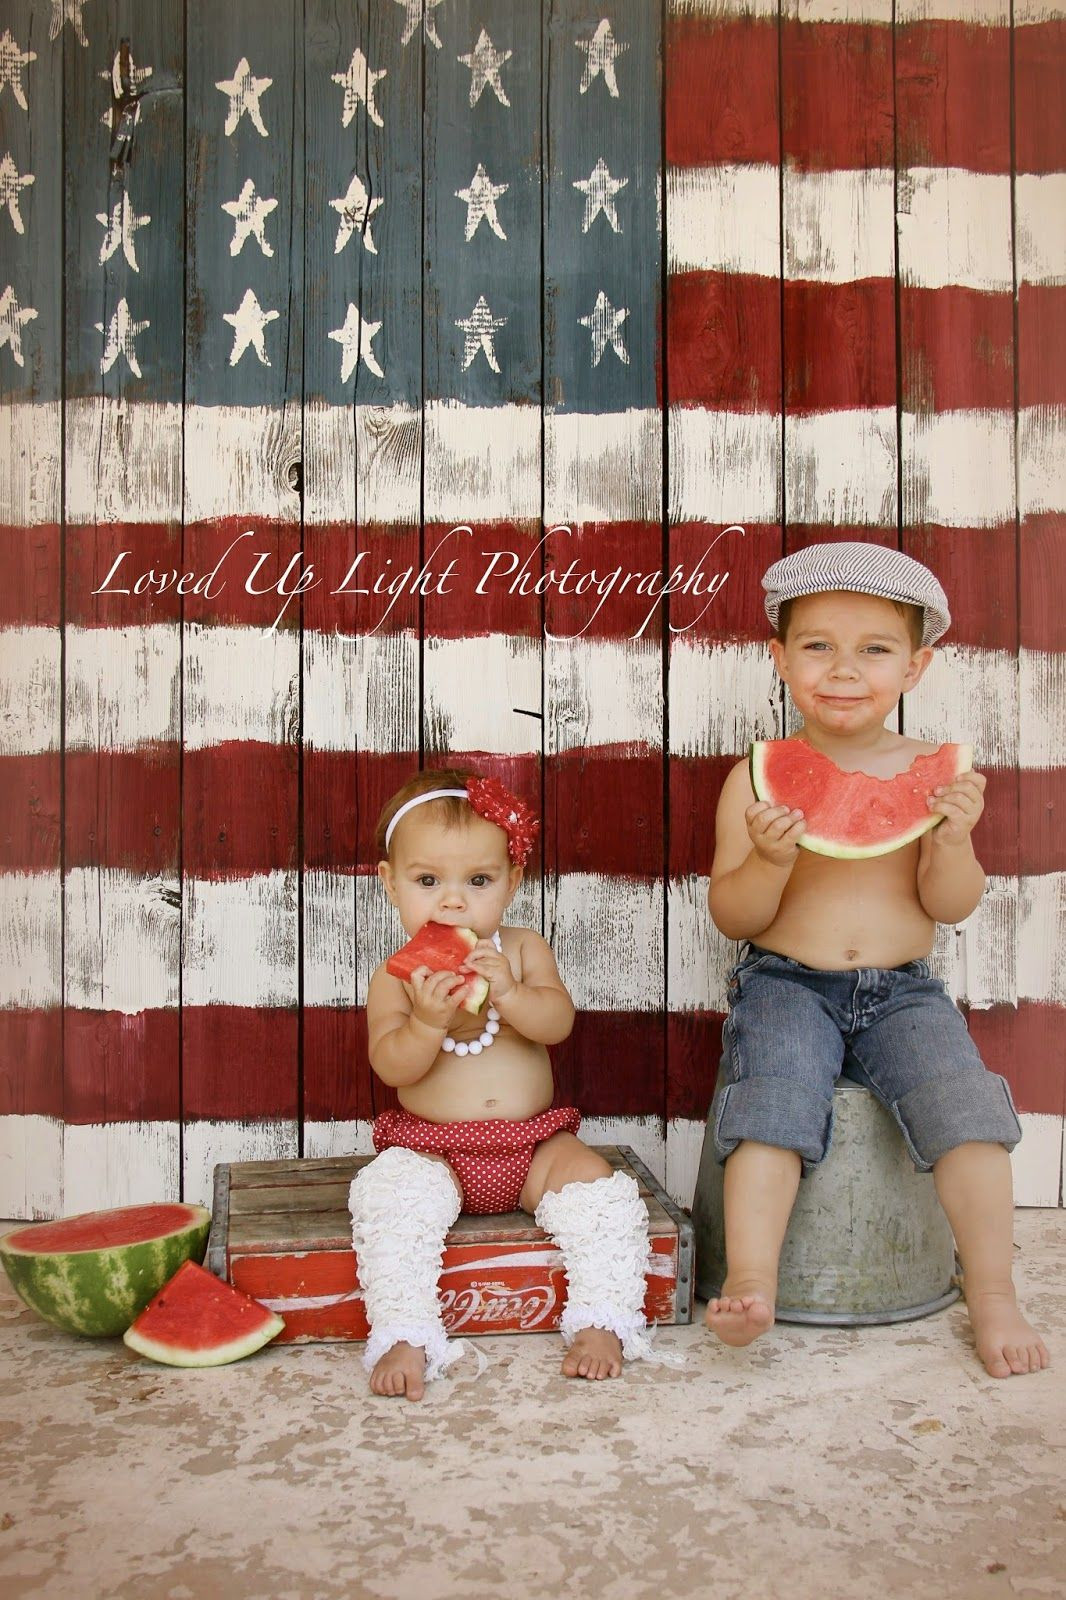 4th Of July Baby Picture Ideas
 Loved Up Light graphy Kids